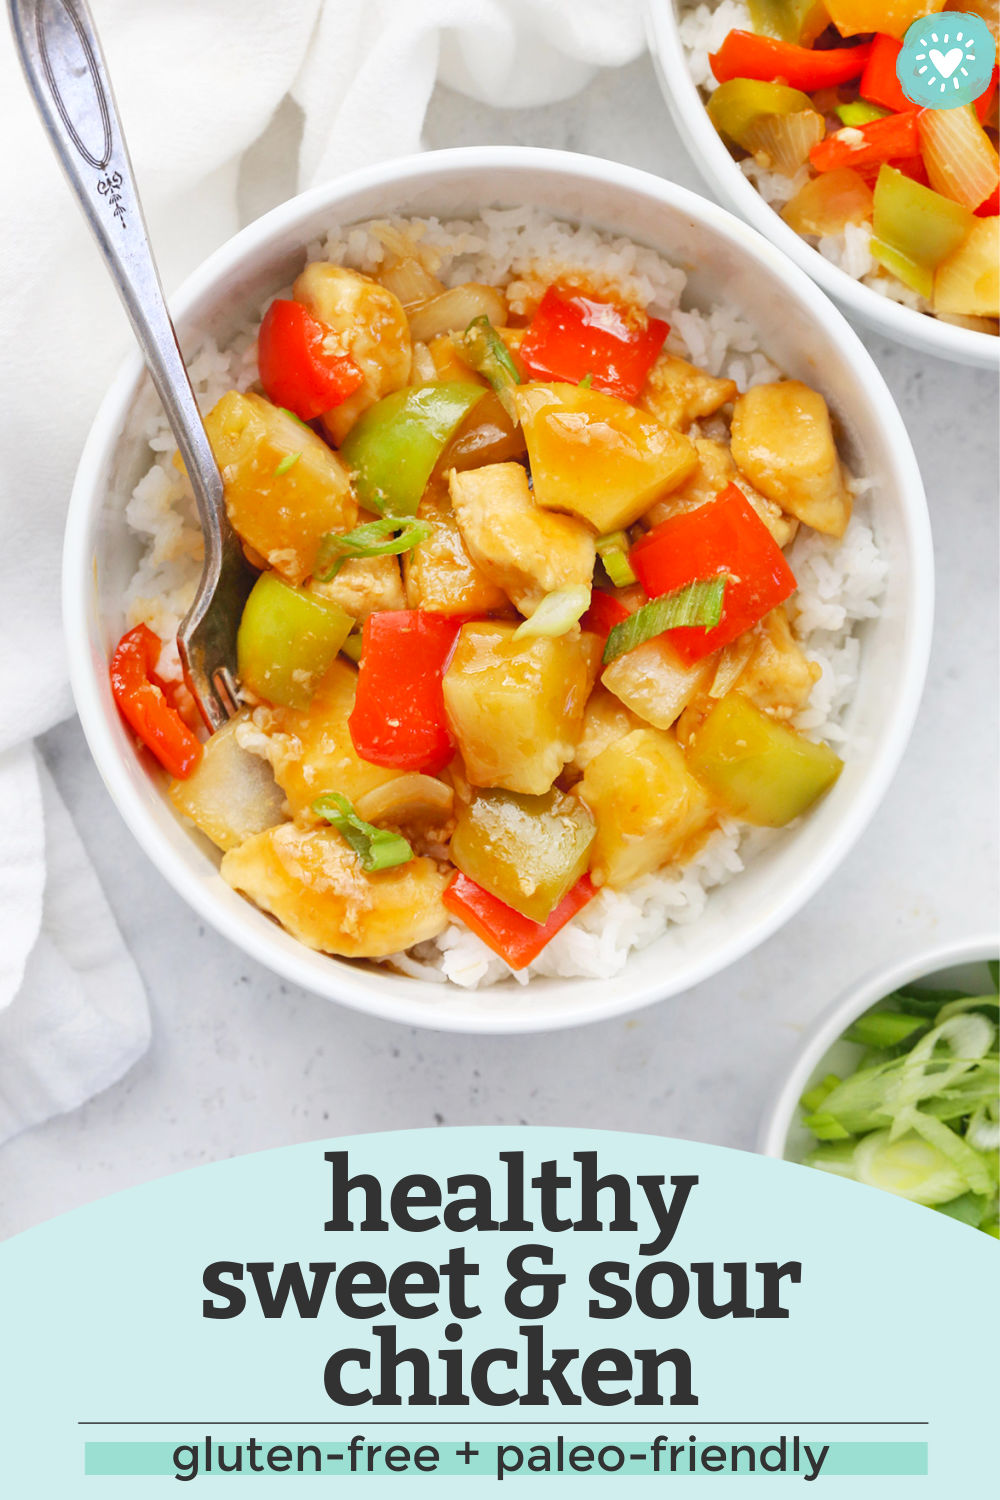 Gluten-free, paleo-friendly Healthy Sweet and Sour Chicken in a white bowl with text overlay that says "healthy sweet & sour chicken. Gluten-Free + Paleo-Friendly"